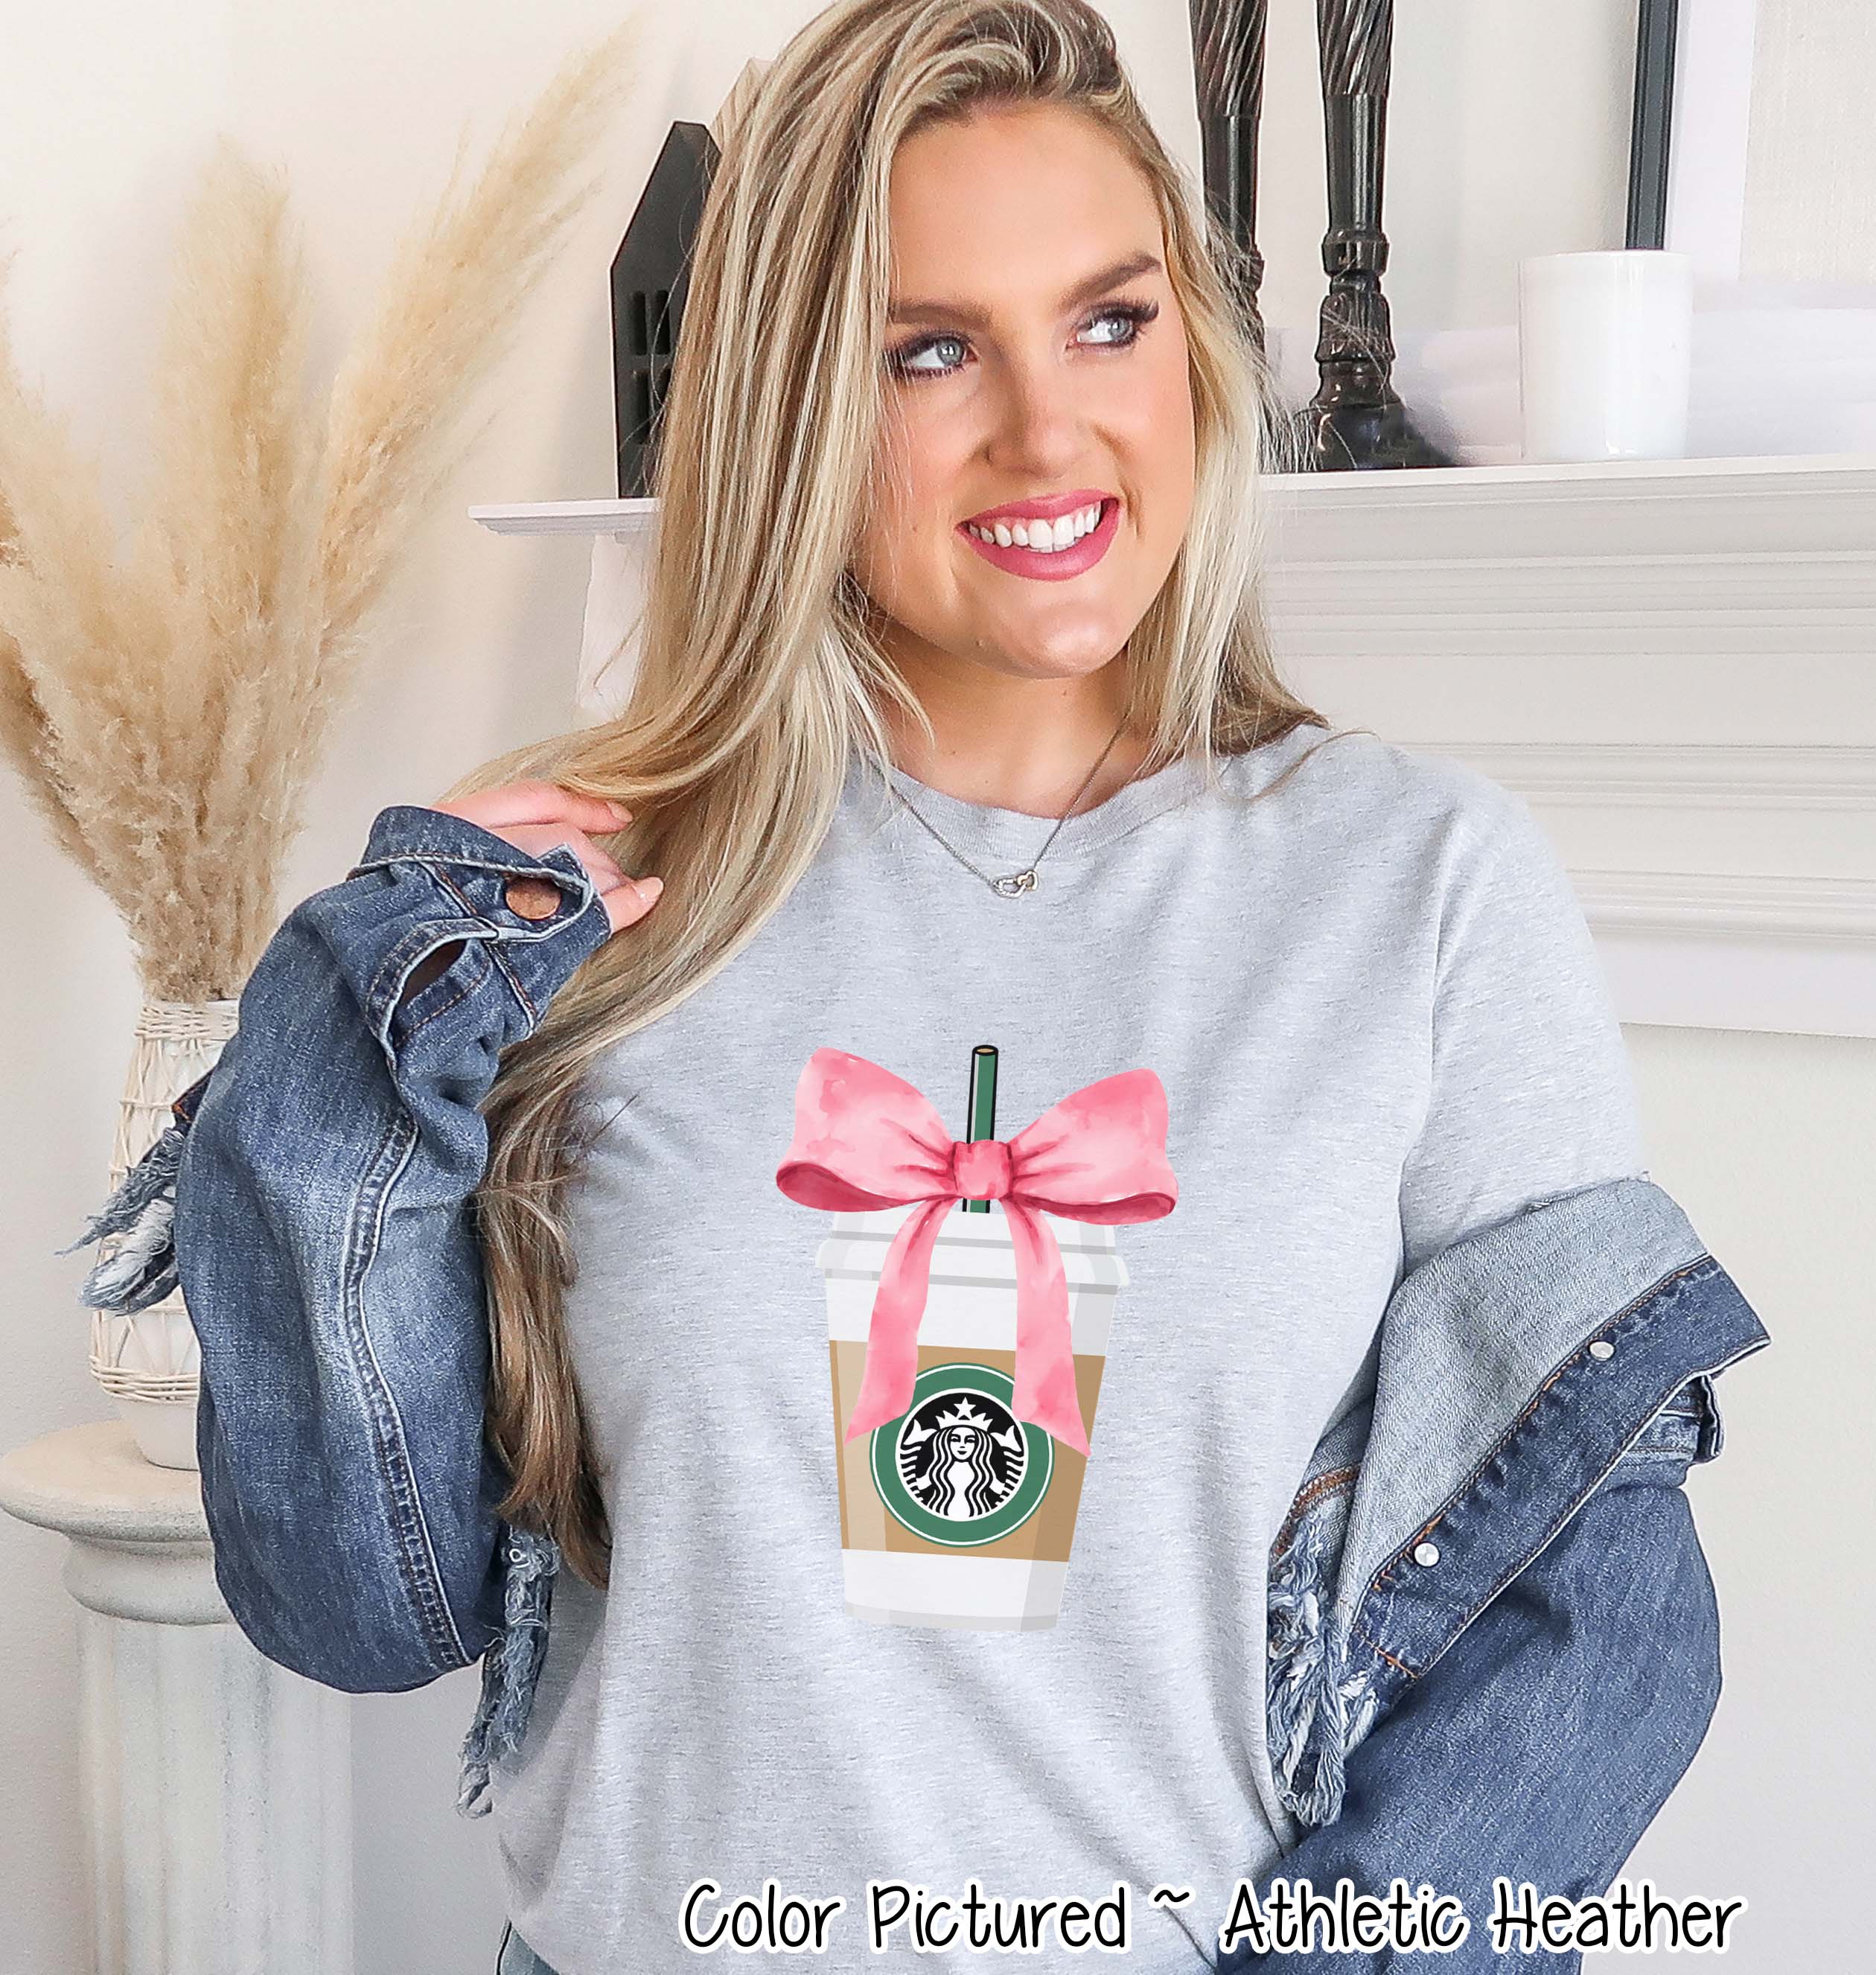 Coquette Pink Bow Starbucks Drink Girly Tee and Sweatshirt